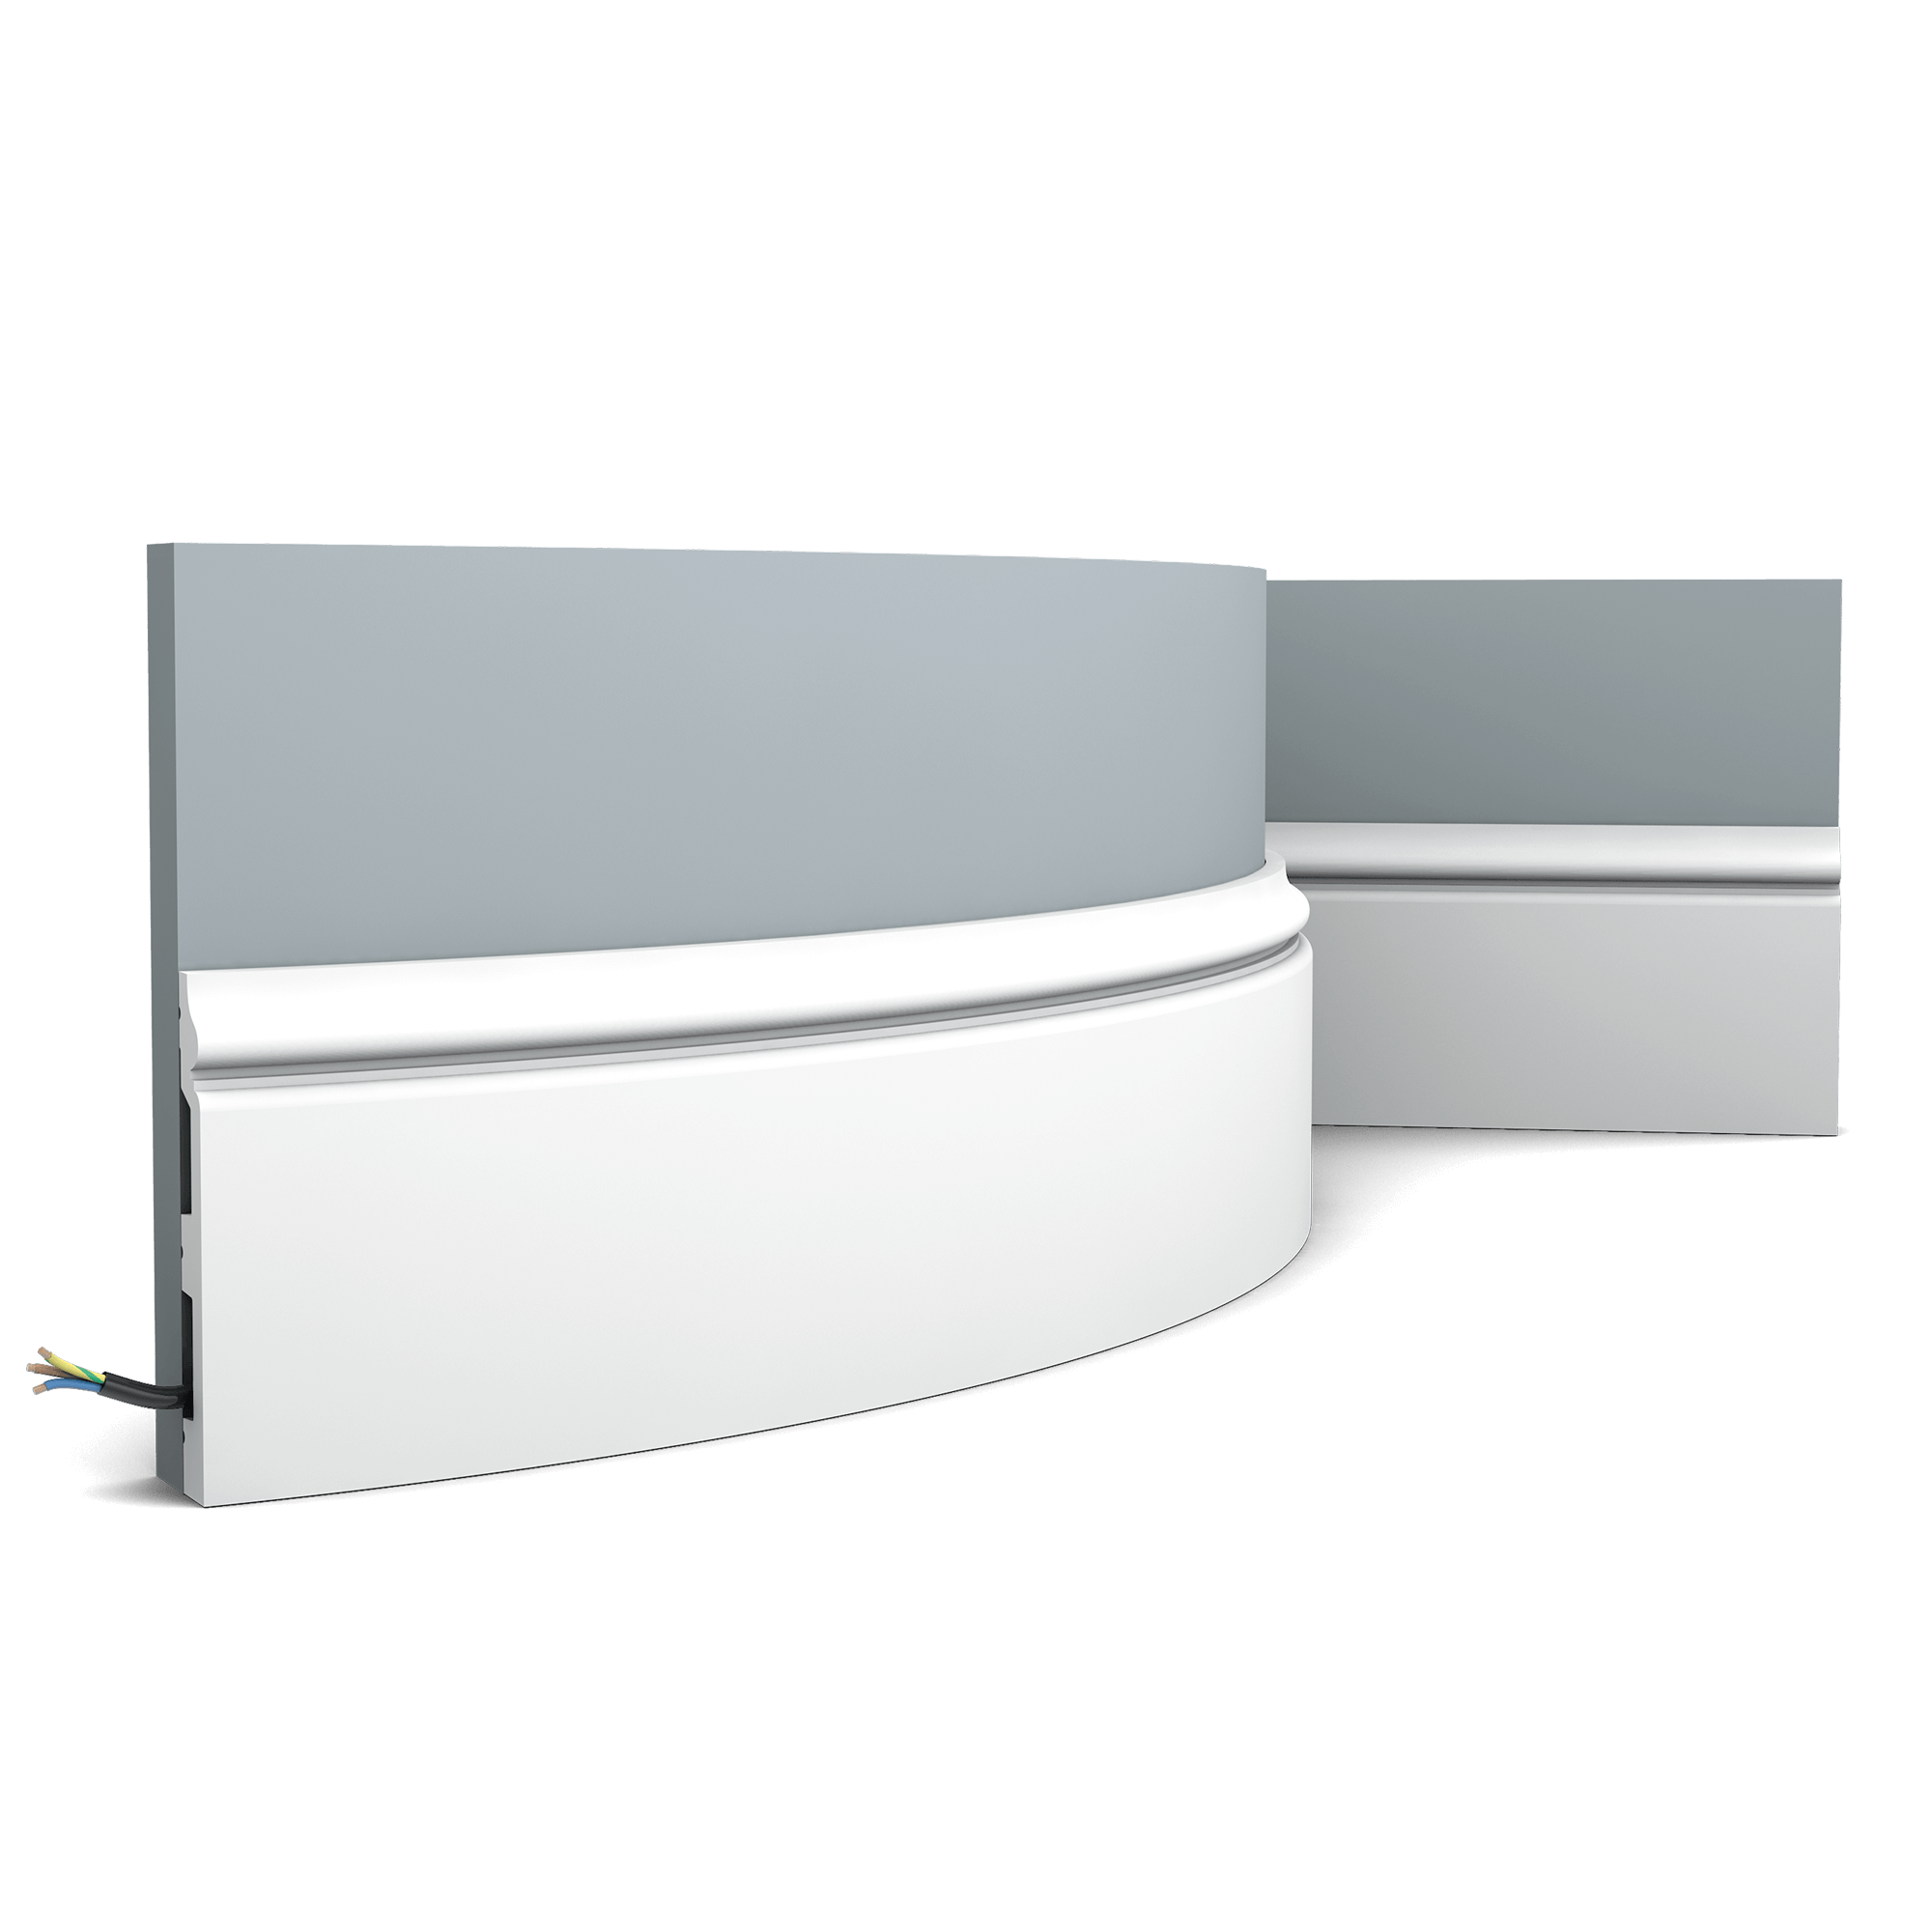 Flexible version of the SX118. This classic skirting board is part of the CONTOUR family. Thanks to its Flex technology, curved walls and surfaces are no problem. Installation remark: It is necessary to screw this profile on the wall. Flex Radius: R min = 40 cm